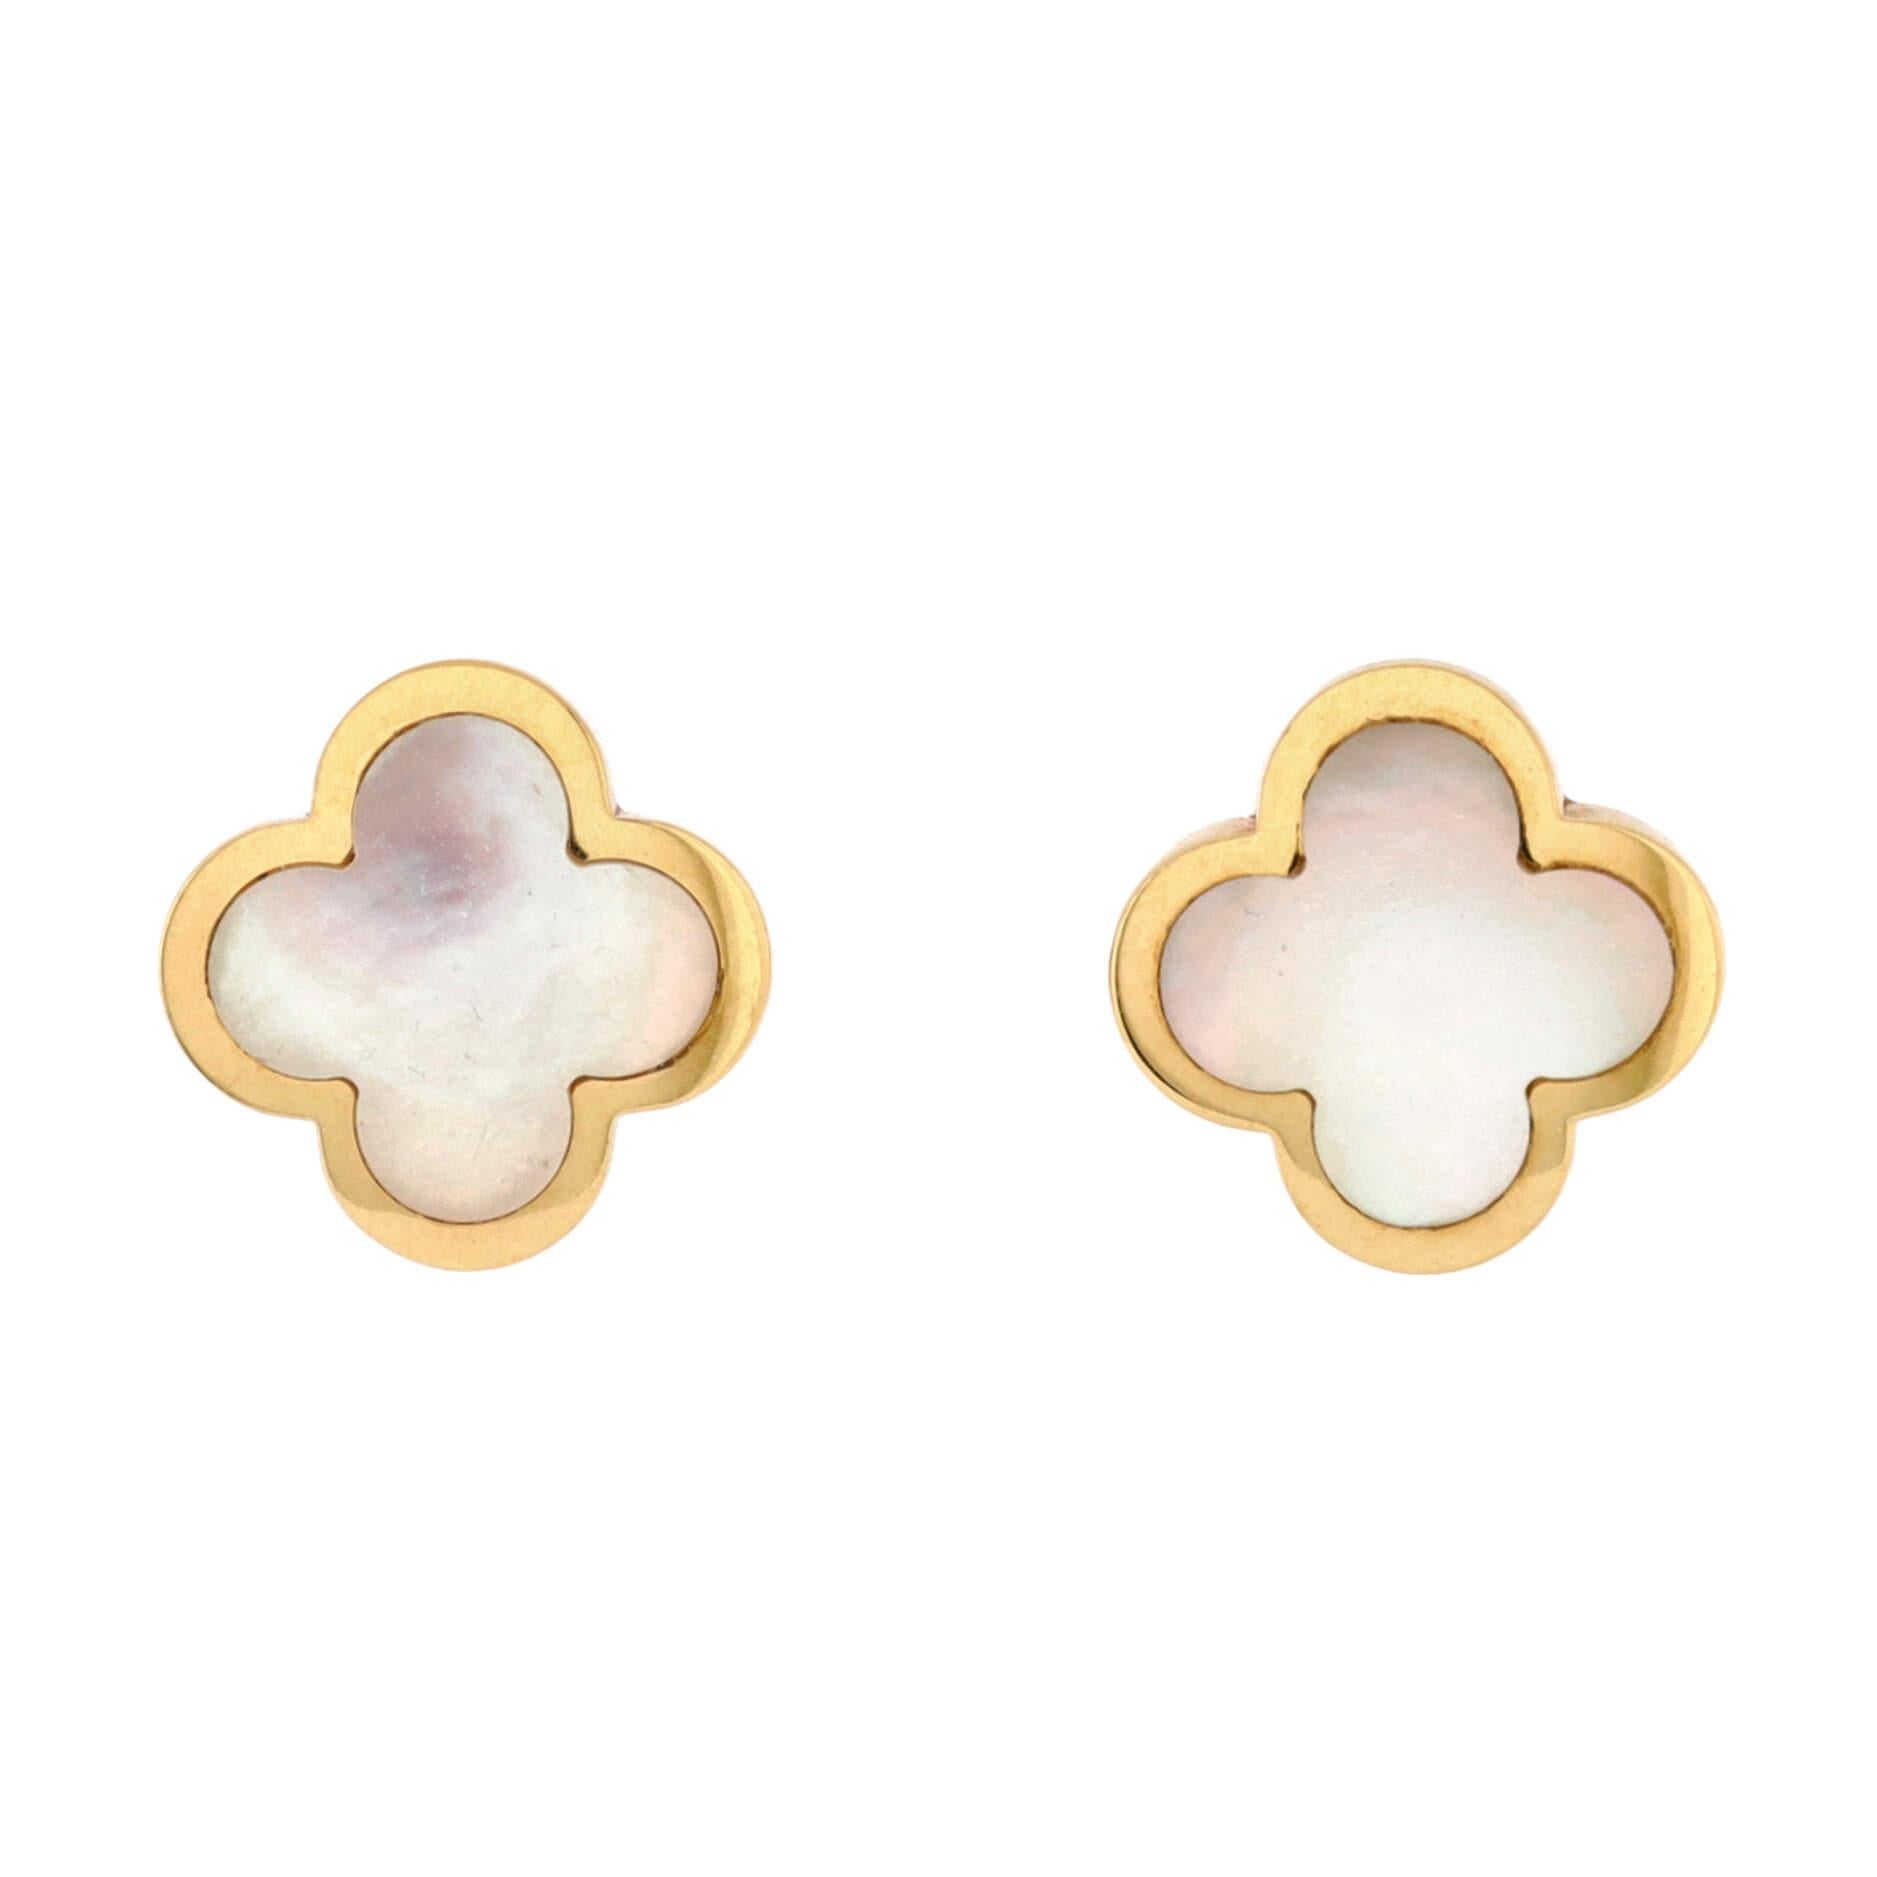 Condition: Good. Moderately heavy wear throughout with dulling to the mother of pearl.
Accessories:
Measurements: Height/Length: 11.20 mm, Width: 11.20 mm
Designer: Van Cleef & Arpels
Model: Pure Alhambra Stud Earrings 18K Yellow Gold and Mother of